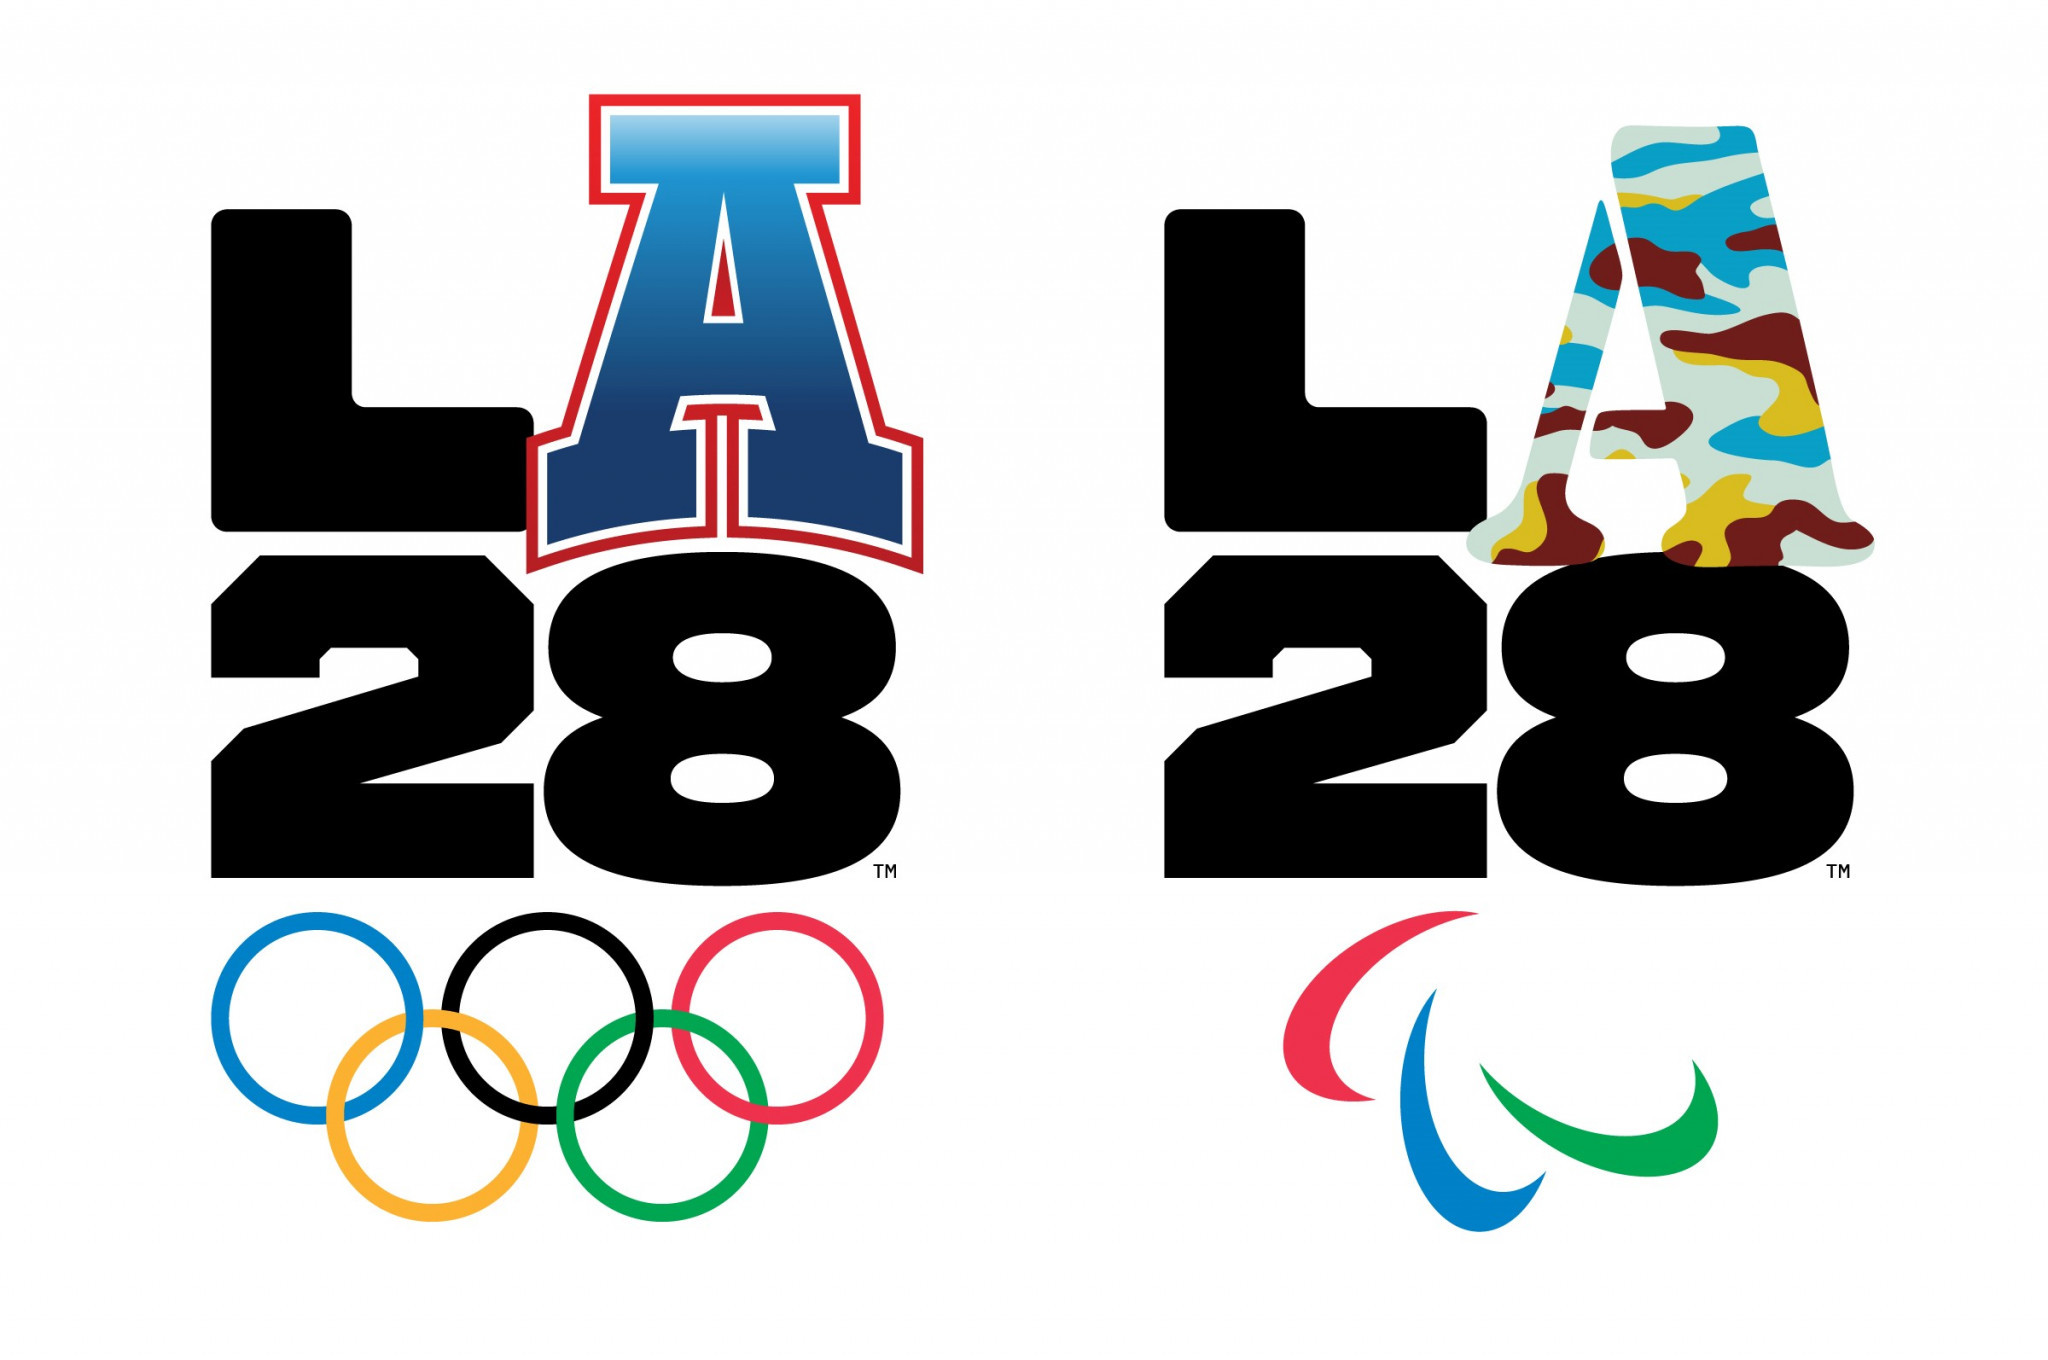 LA 2028 organisers have held initial meetings with community leaders as part of their preparations for the 2028 Olympic and Paralympic Games ©LA28